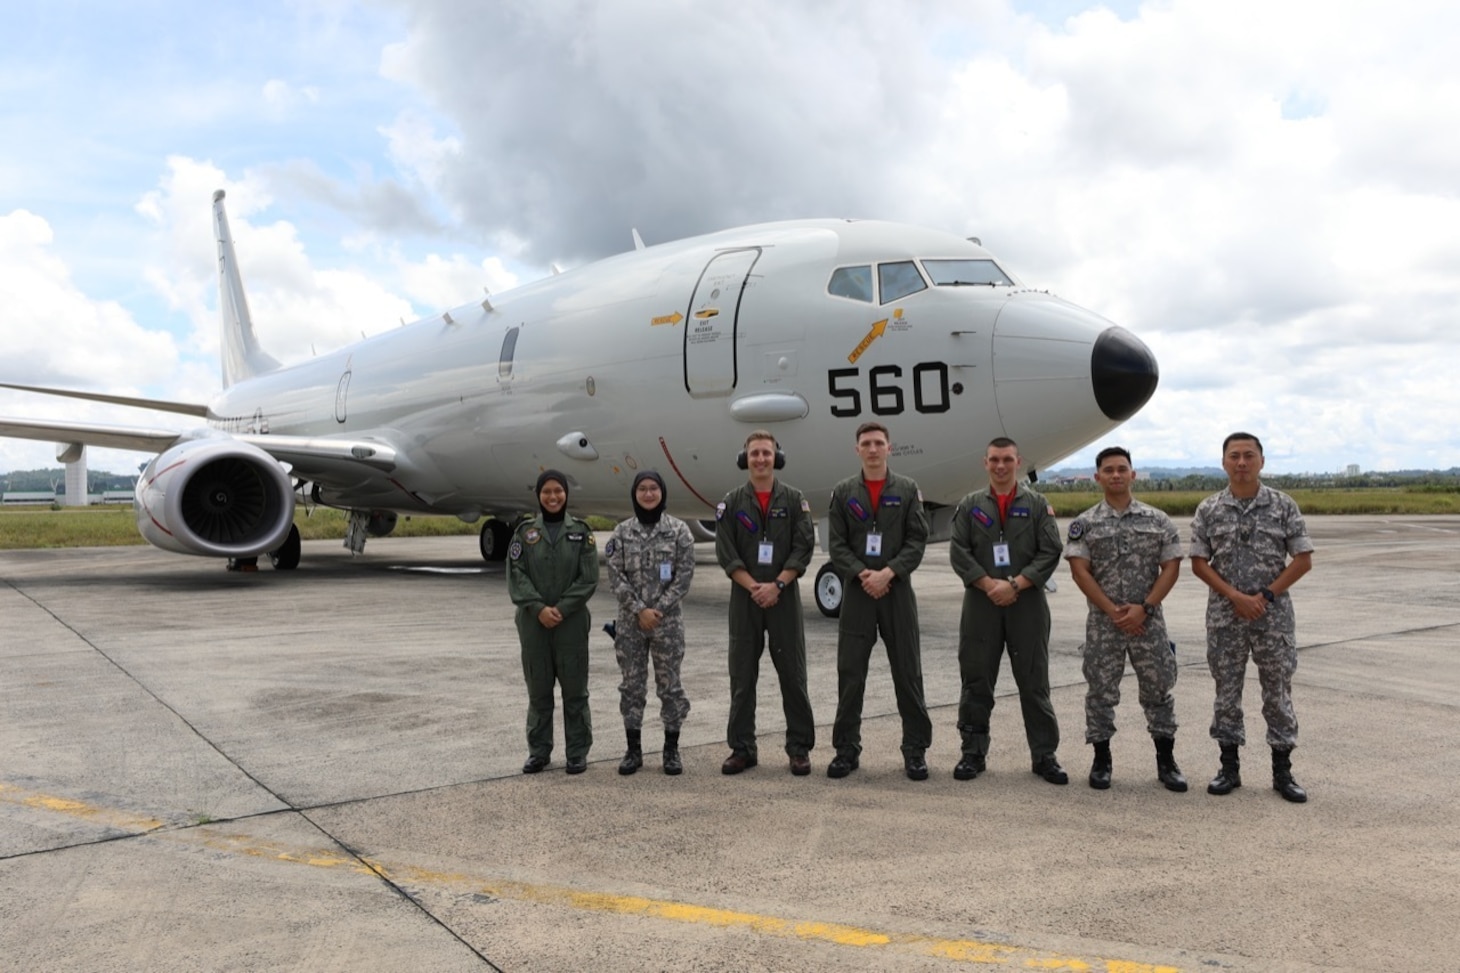 221025-N-FY142-0010 RIMBA AIR BASE, Brunei (Oct. 25, 2022) –  Members of Combat Aircrew 9, assigned to the “Red Lancers” of Patrol Squadron (VP) 10, pose for a photo in front of a static display with members of the Royal Brunei Armed Forces during Cooperation Afloat Readiness and Training Brunei 2022. VP-10 is currently operating from Kadena Air Base in Okinawa, Japan. The squadron conducts maritime patrol and reconnaissance, as well as theater outreach operations, as part of a rotational deployment to the U.S. 7th Fleet area of operations. (U.S. Navy photo by Aviation Electrician’s Mate 1st Class Brian Woodford)